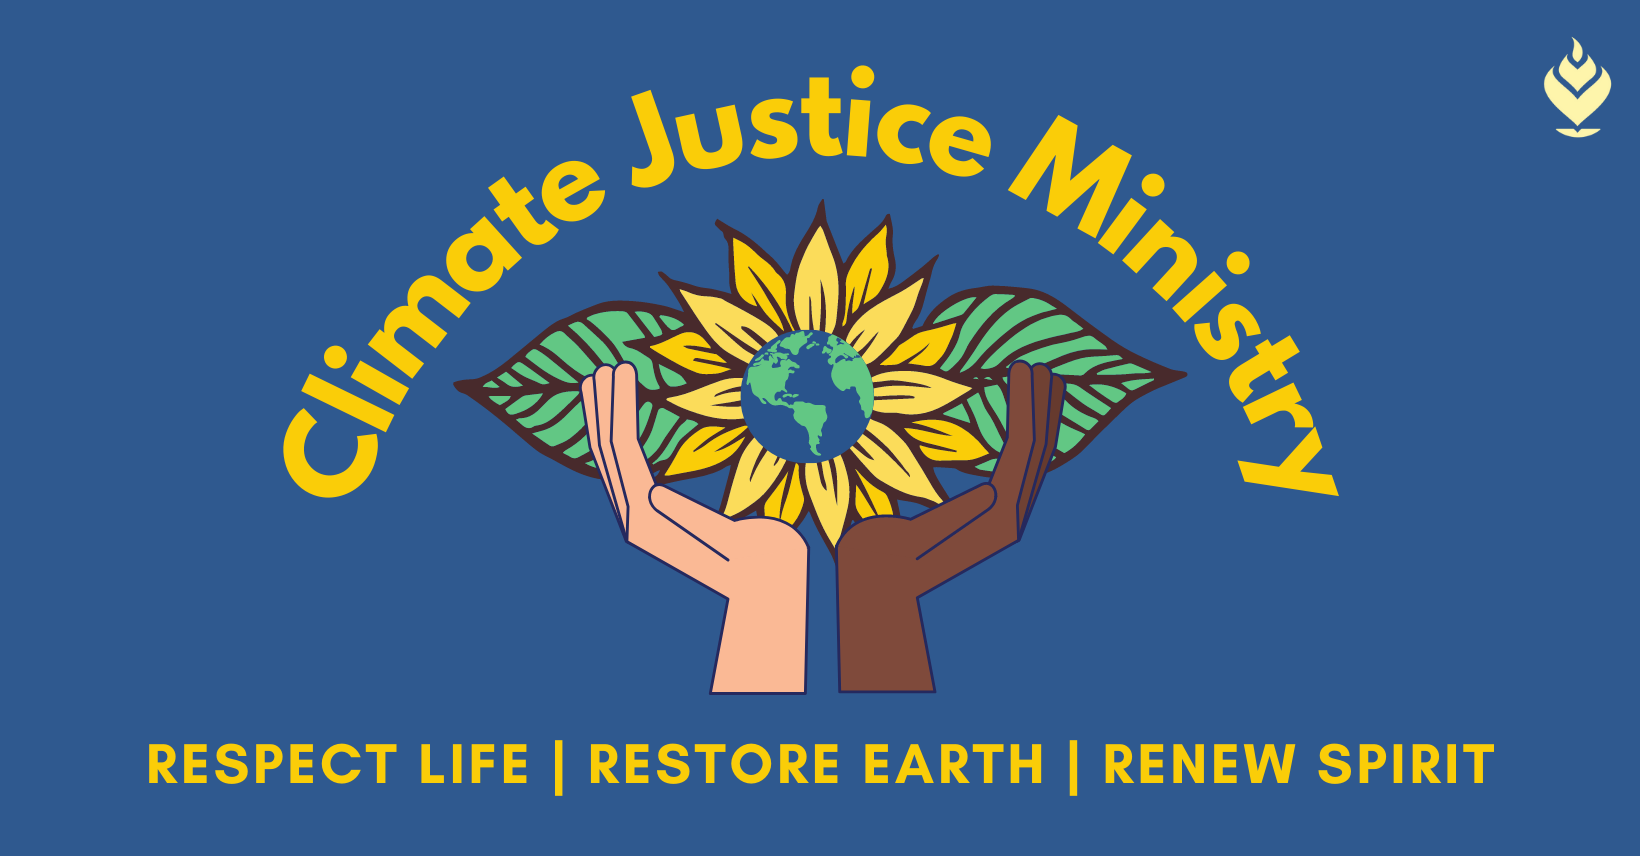 Climate Justice Resources 🌎